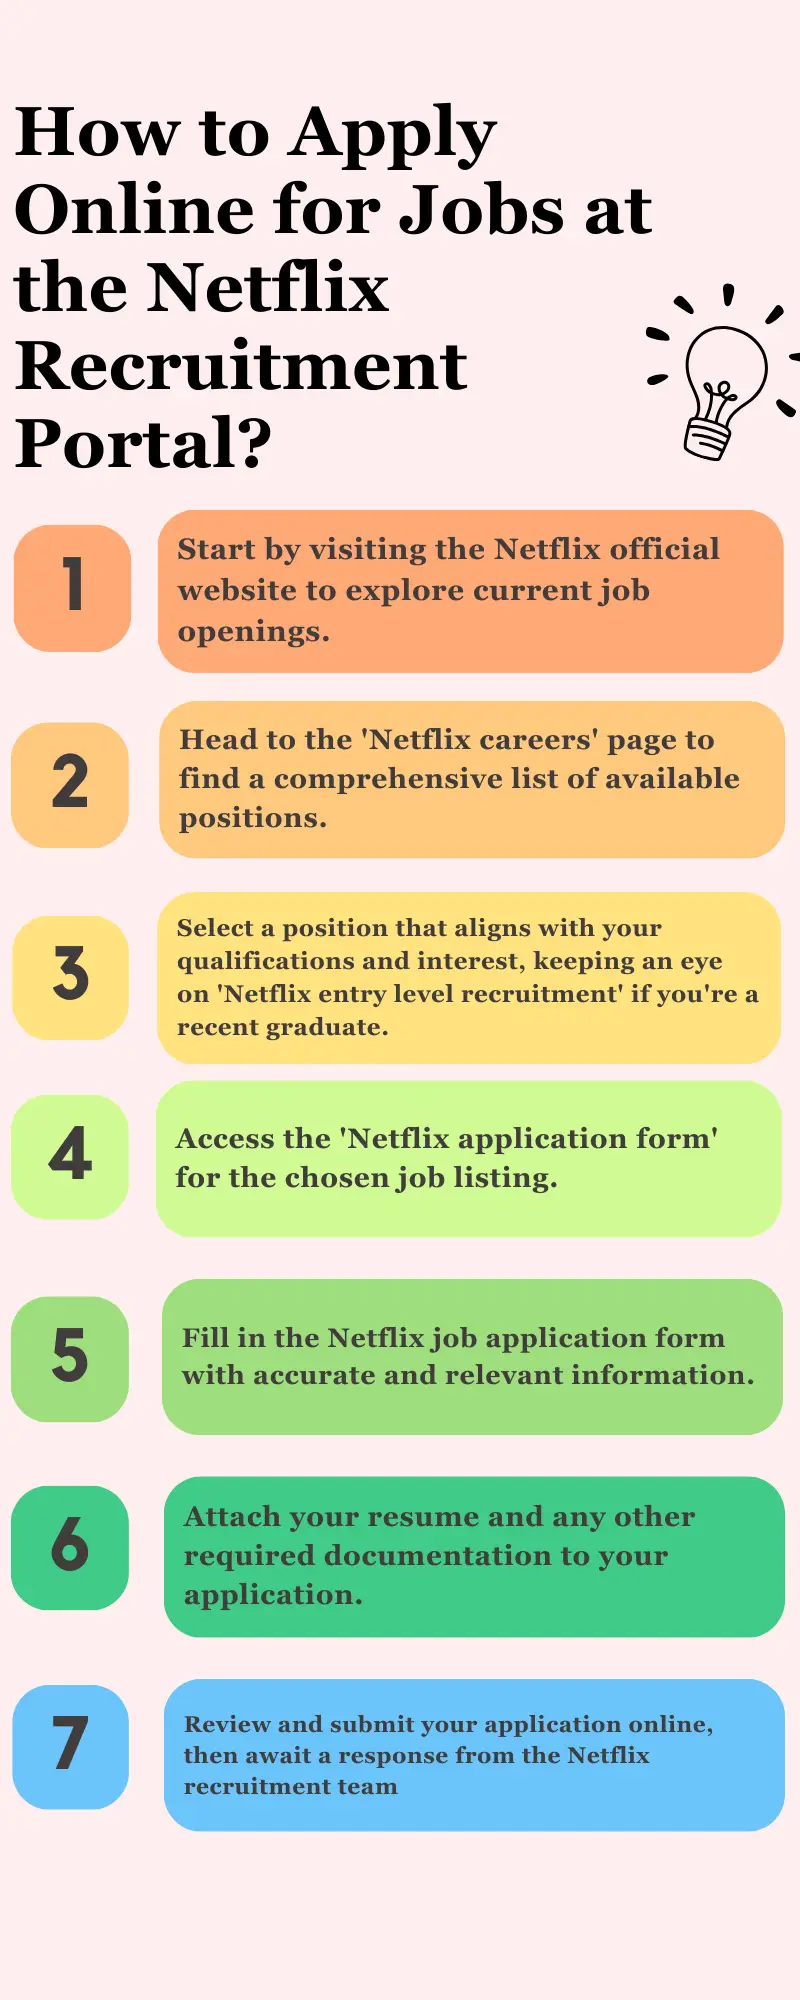 How to Apply Online for Jobs at the Netflix Recruitment Portal?